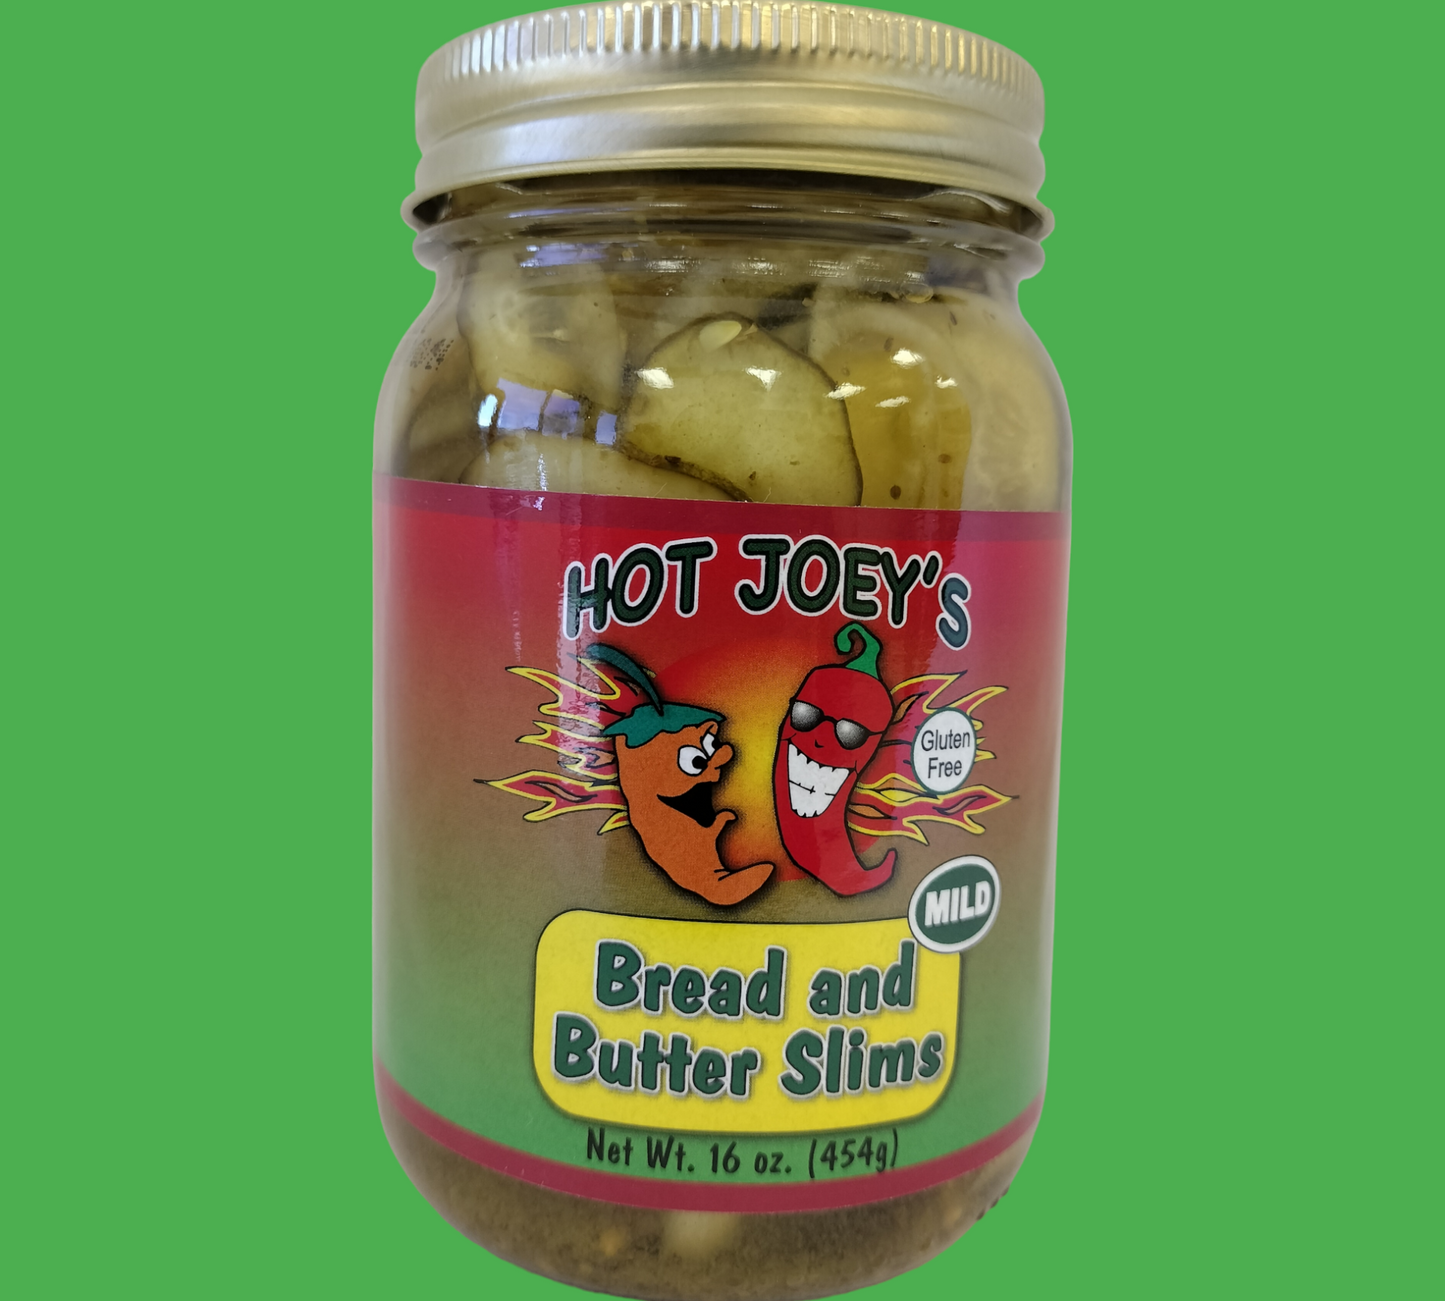 Hot Joey's Bread and Butter Pickle Slims 16 oz